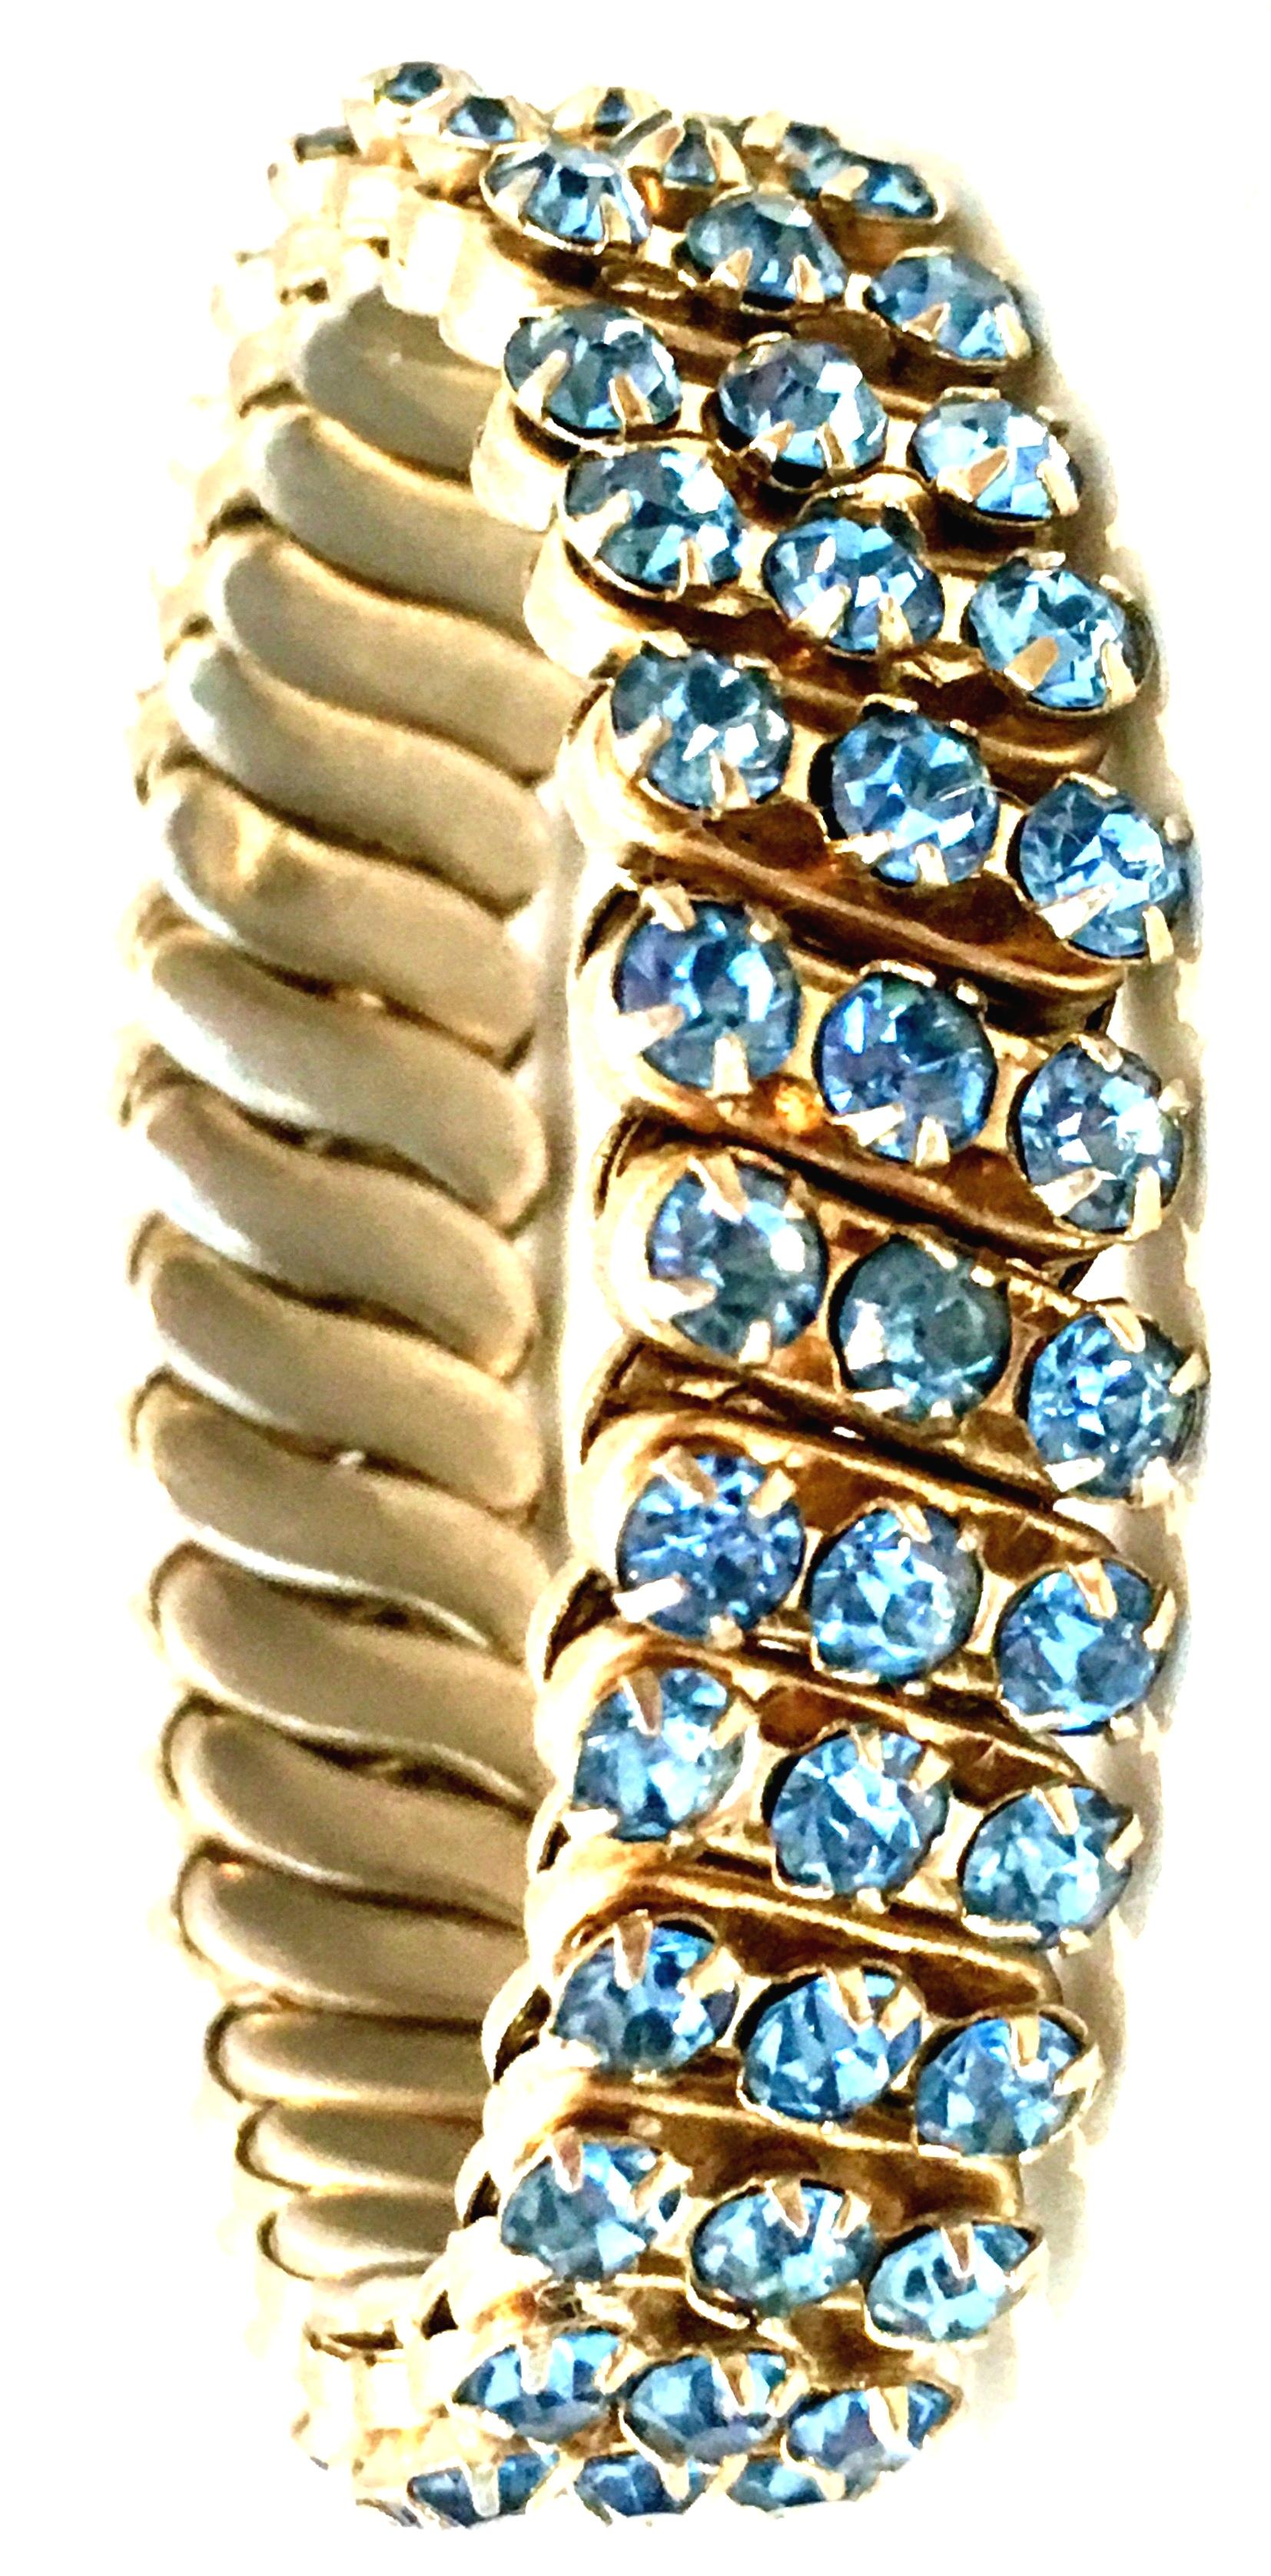 1960'S Gold Plate & Sapphire Blue Austrian Crystal Rhinestone Expansion Stretch Link Bracelet-Hong Kong. This unique gold gilt metal with fancy prong set sapphire blue Austrian crystal rhinestones, fits most wrists. Expands to approximately 4